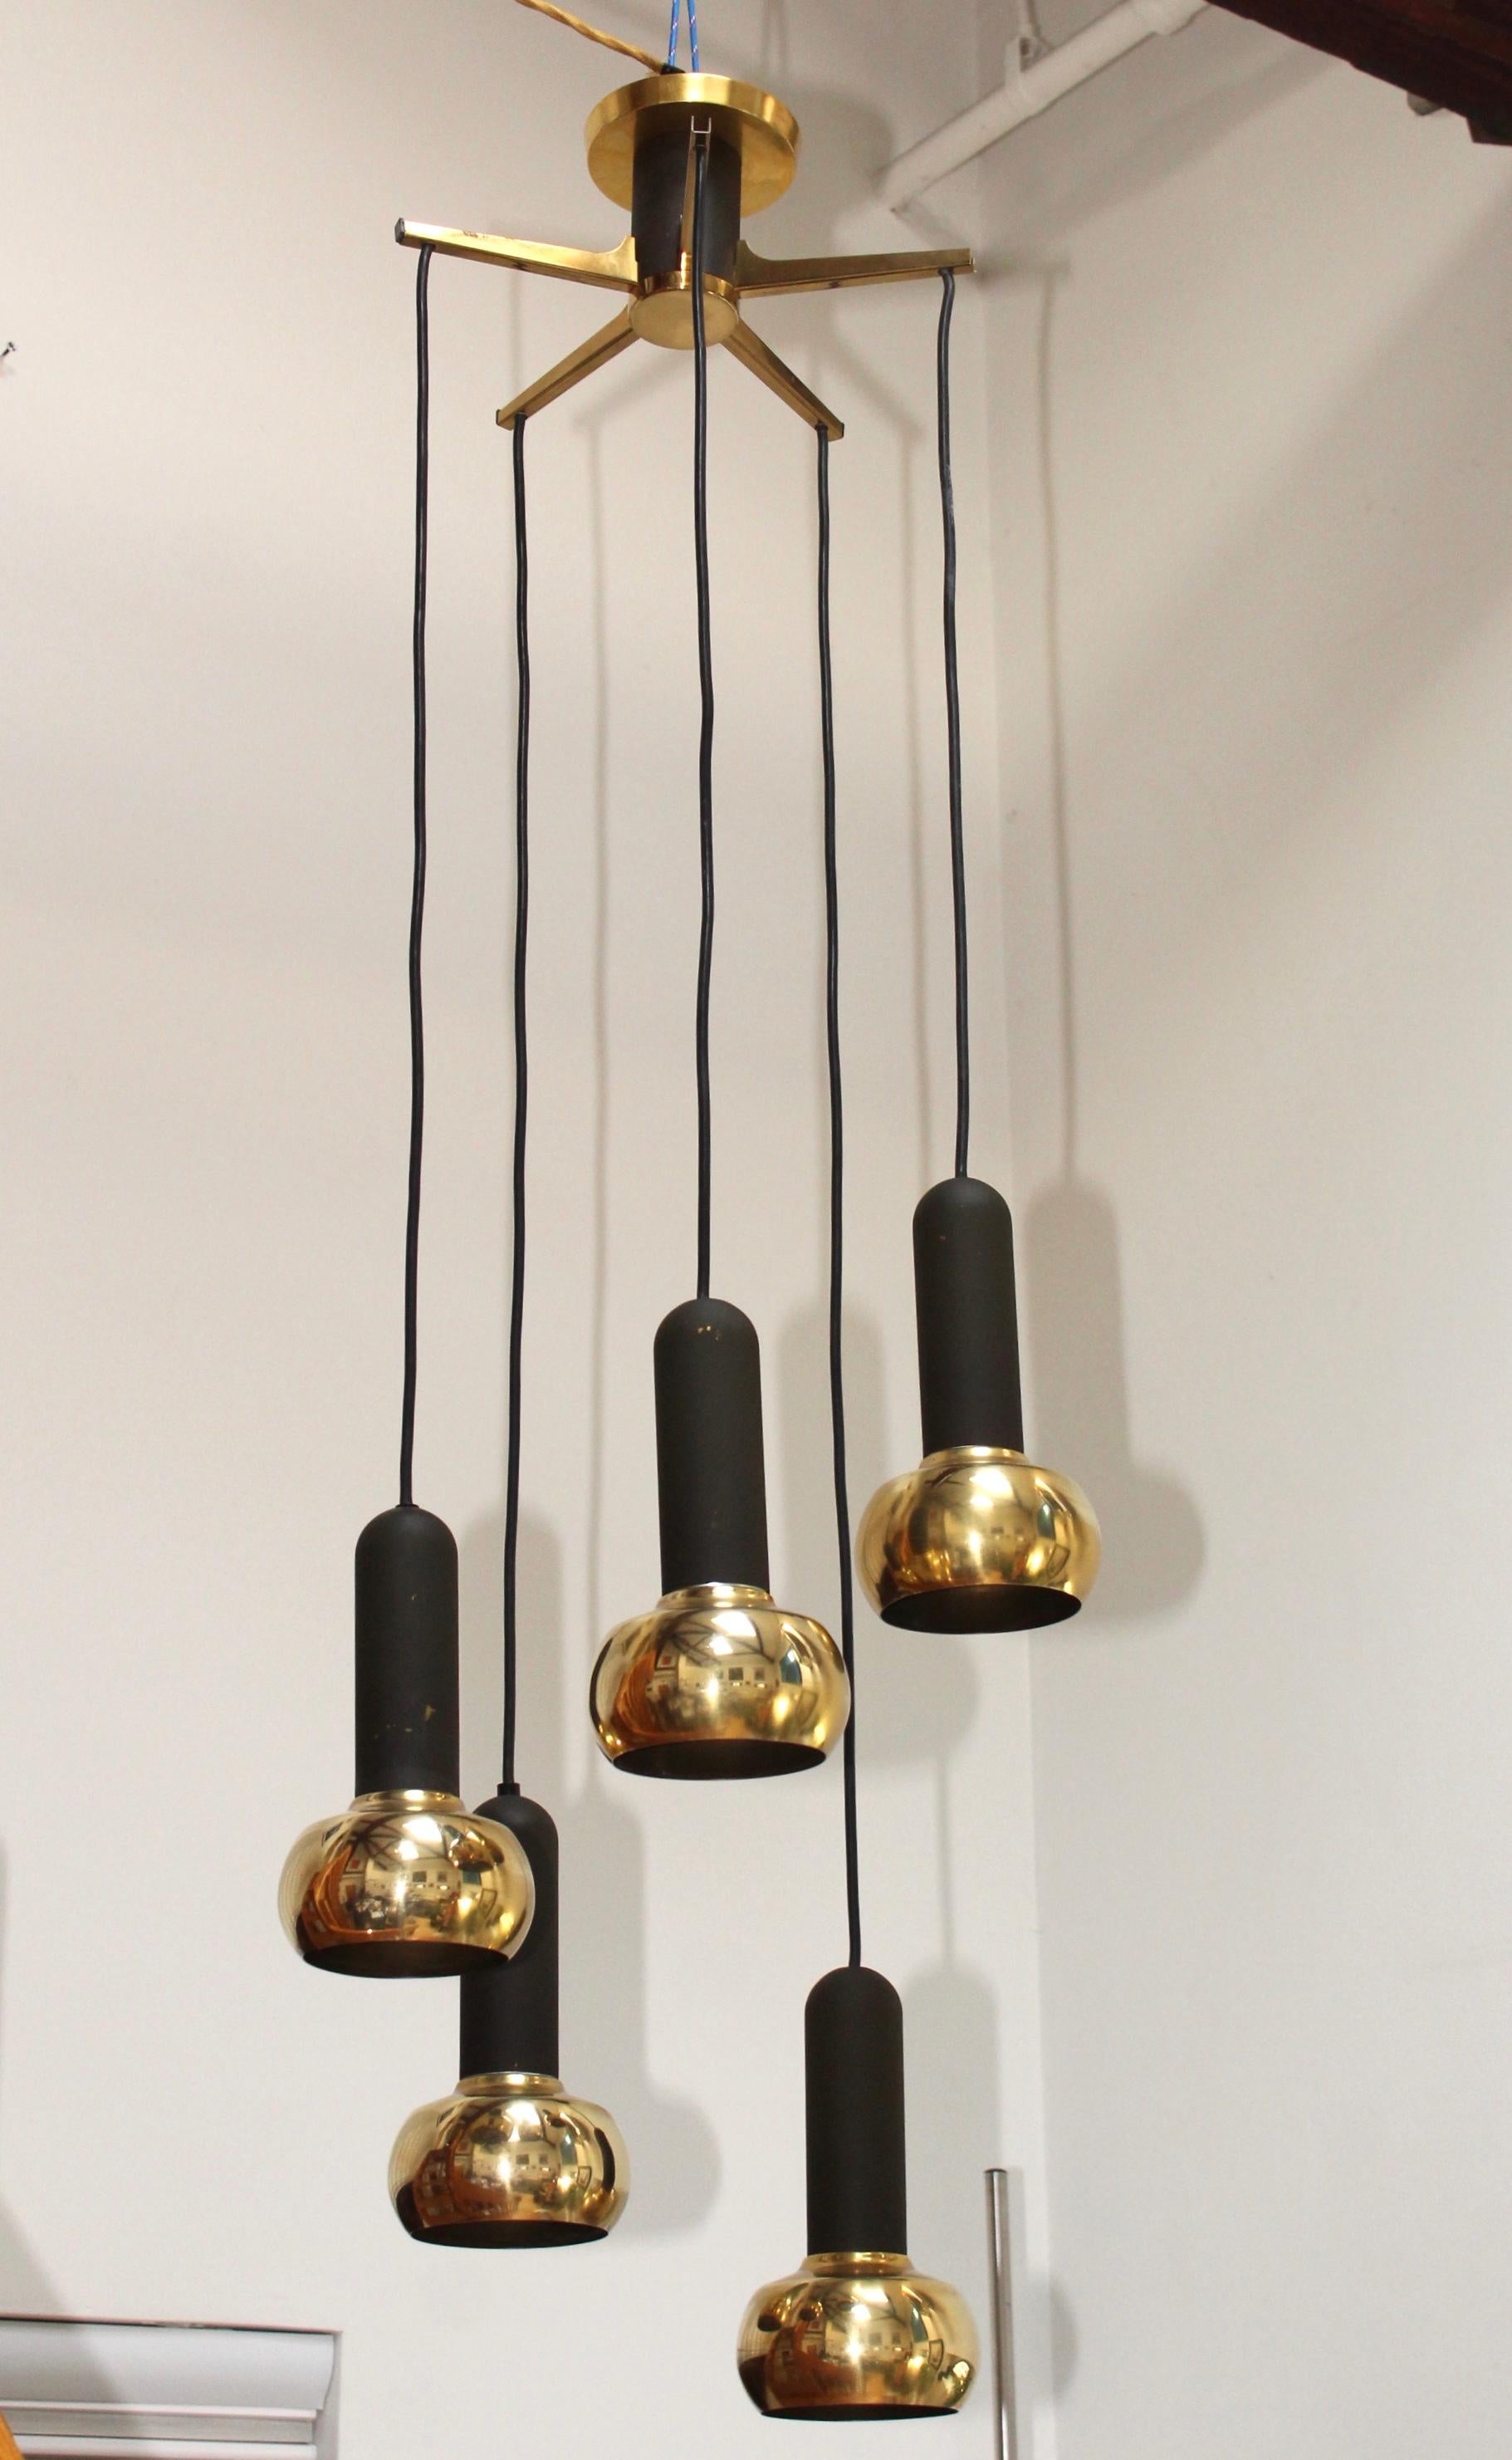 Stunning 1970s brass 5-light pendant by Sische, Germany. In vintage original condition, with some wear and patina due to age and use.